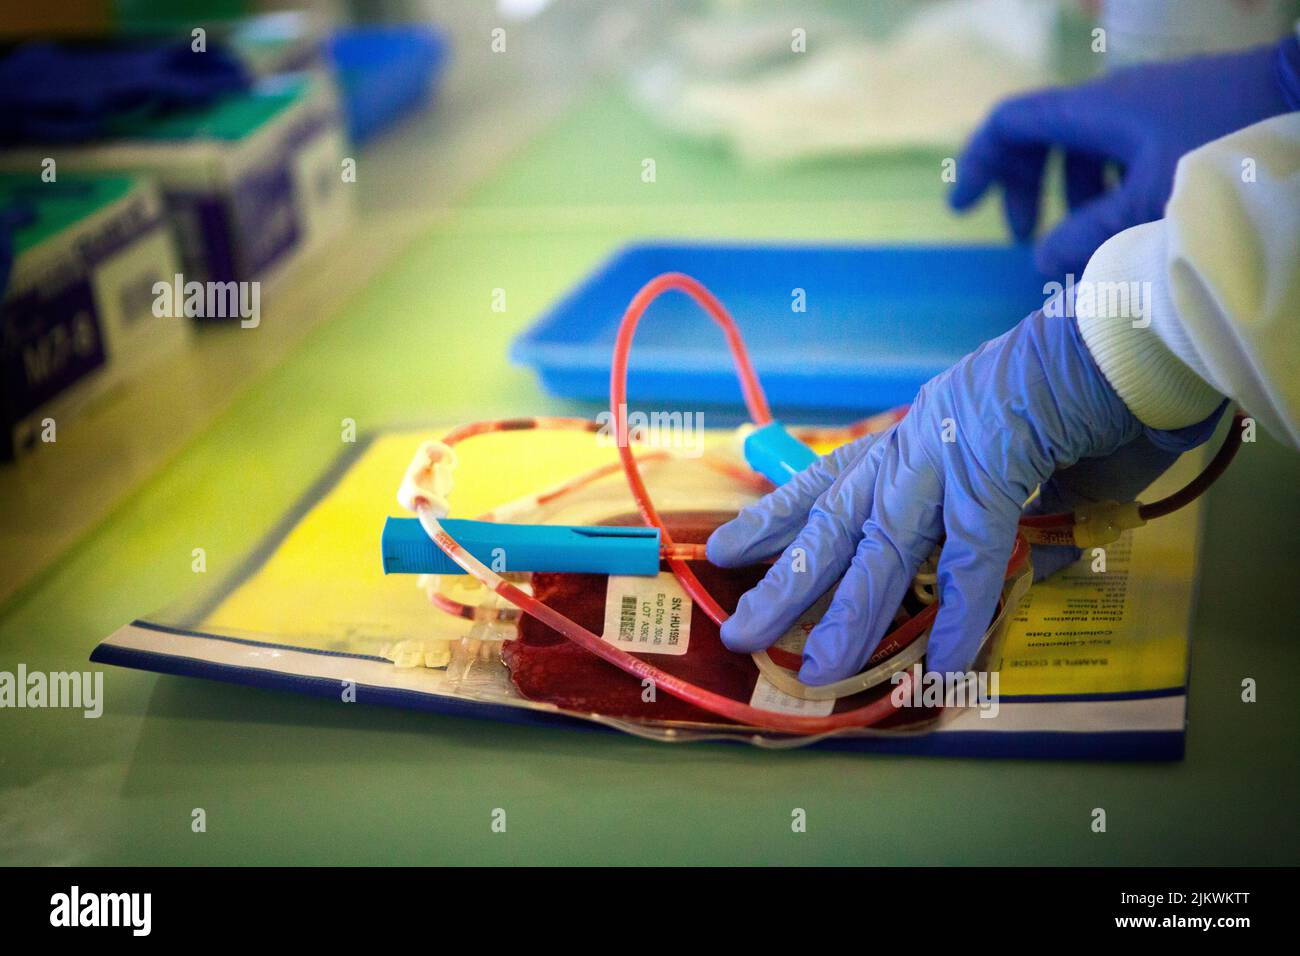 Biobank storing stem cells from blood and cord tissue. Stock Photo